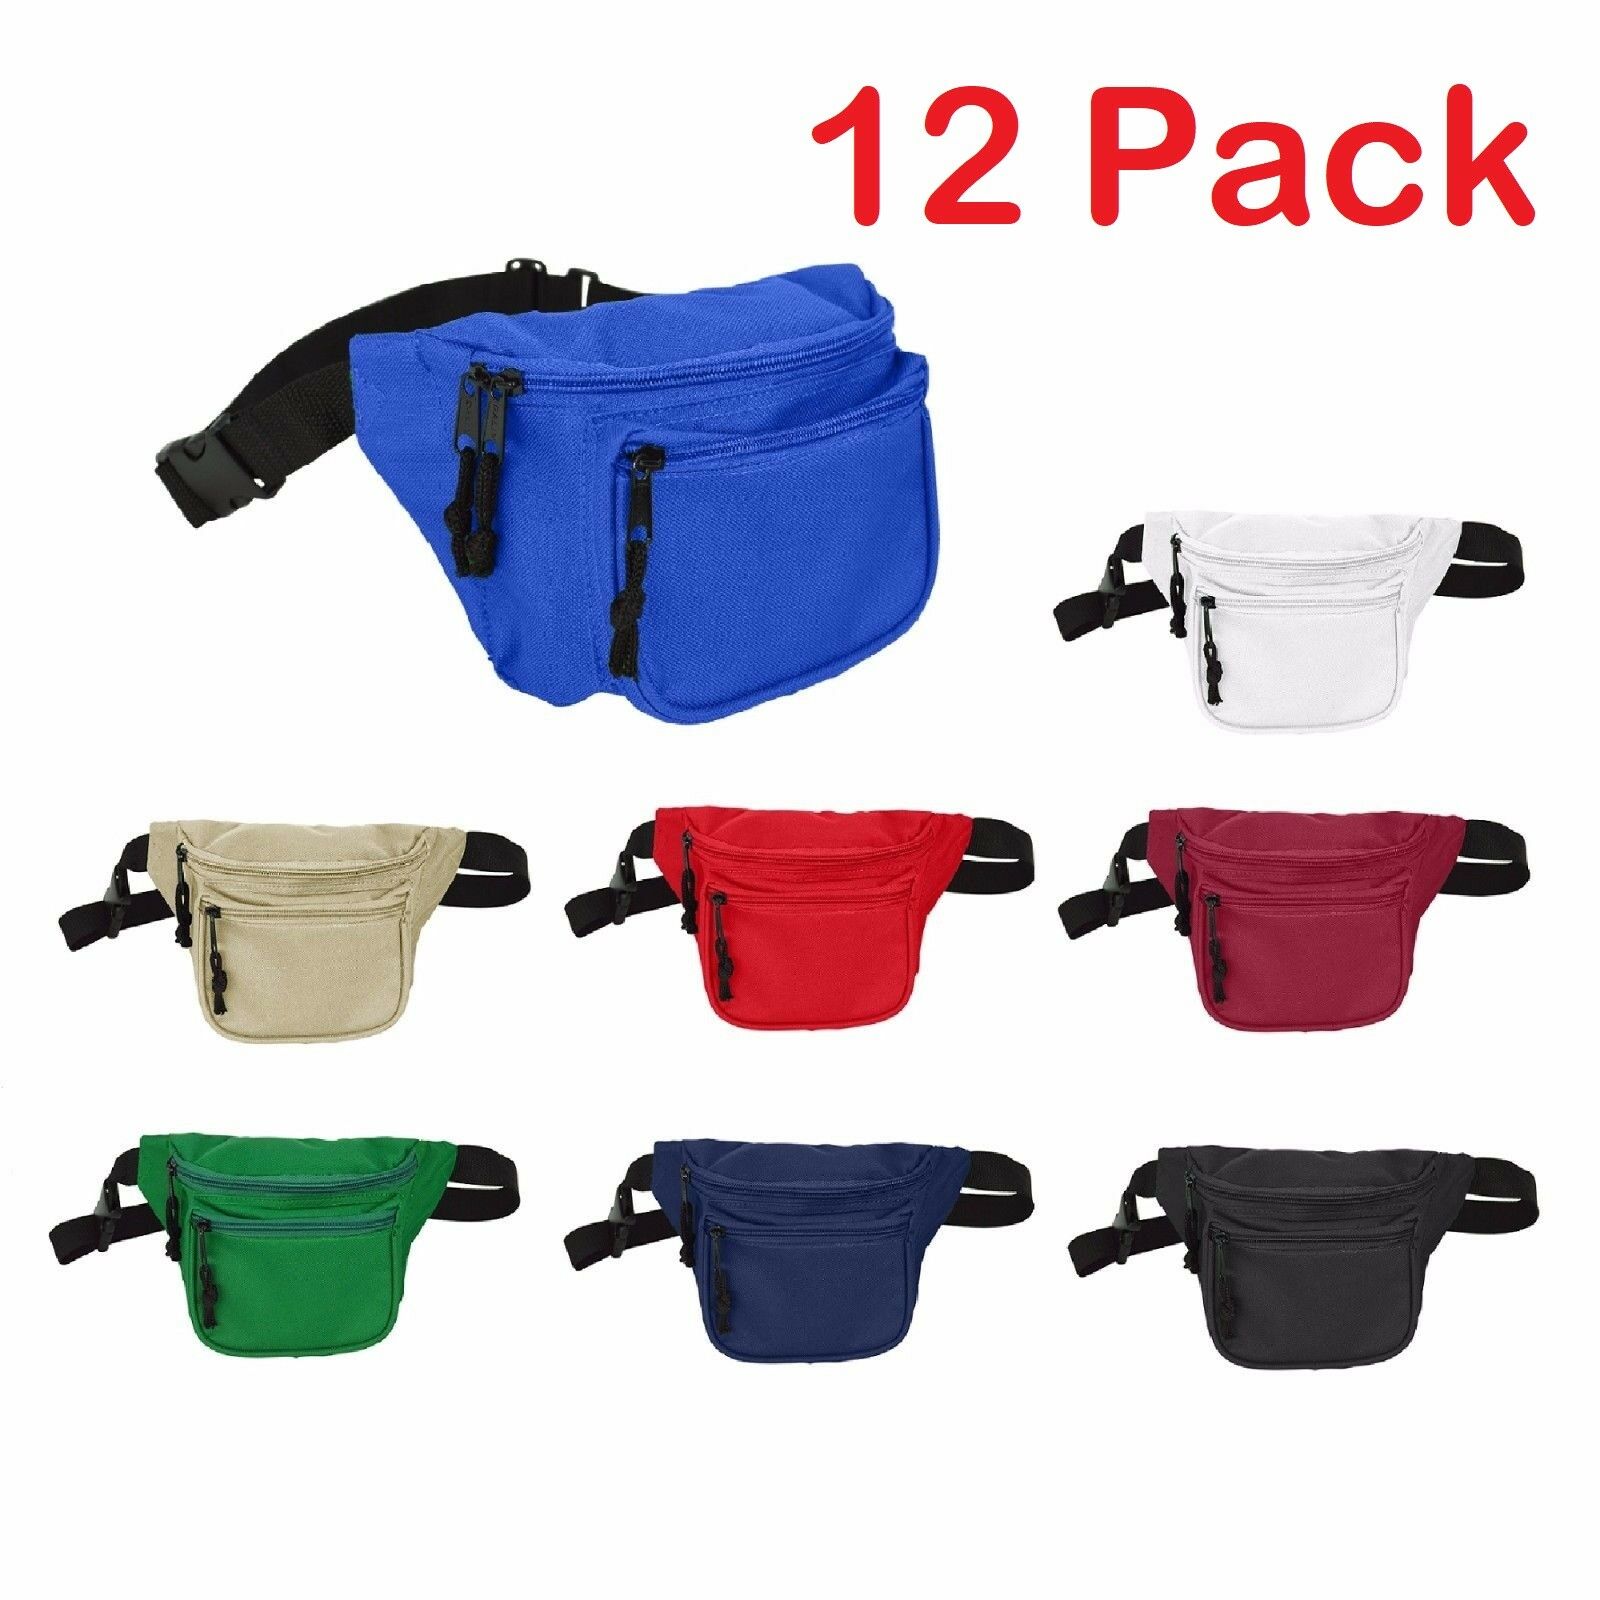 Dalix Waist Bag Fanny Pack With 3 Pockets Travel Waist Pouch Adjustable 12 Pack